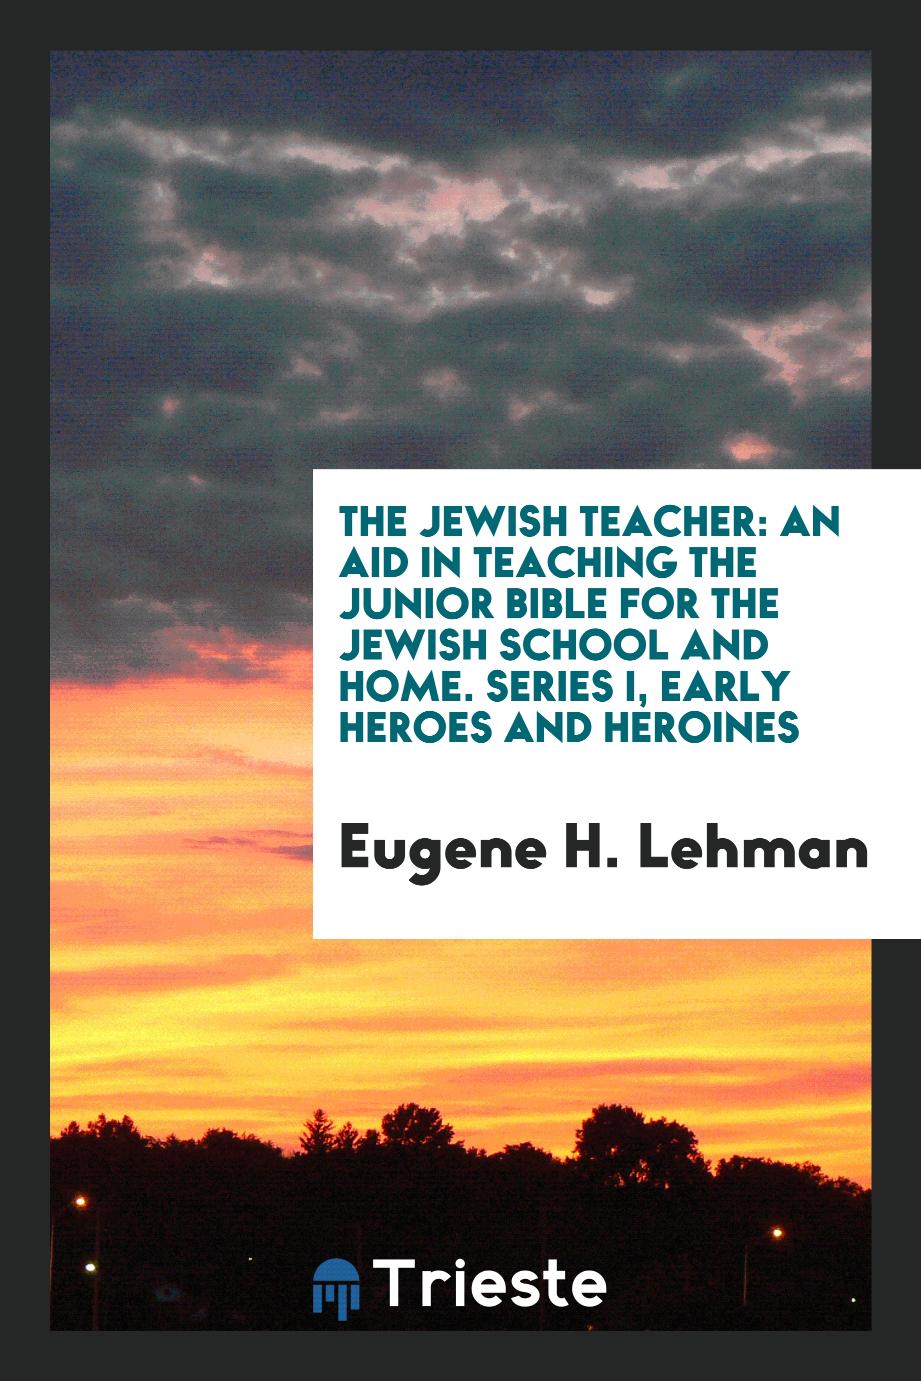 The Jewish Teacher: An Aid in Teaching the Junior Bible for the Jewish School and Home. Series I, Early Heroes and Heroines